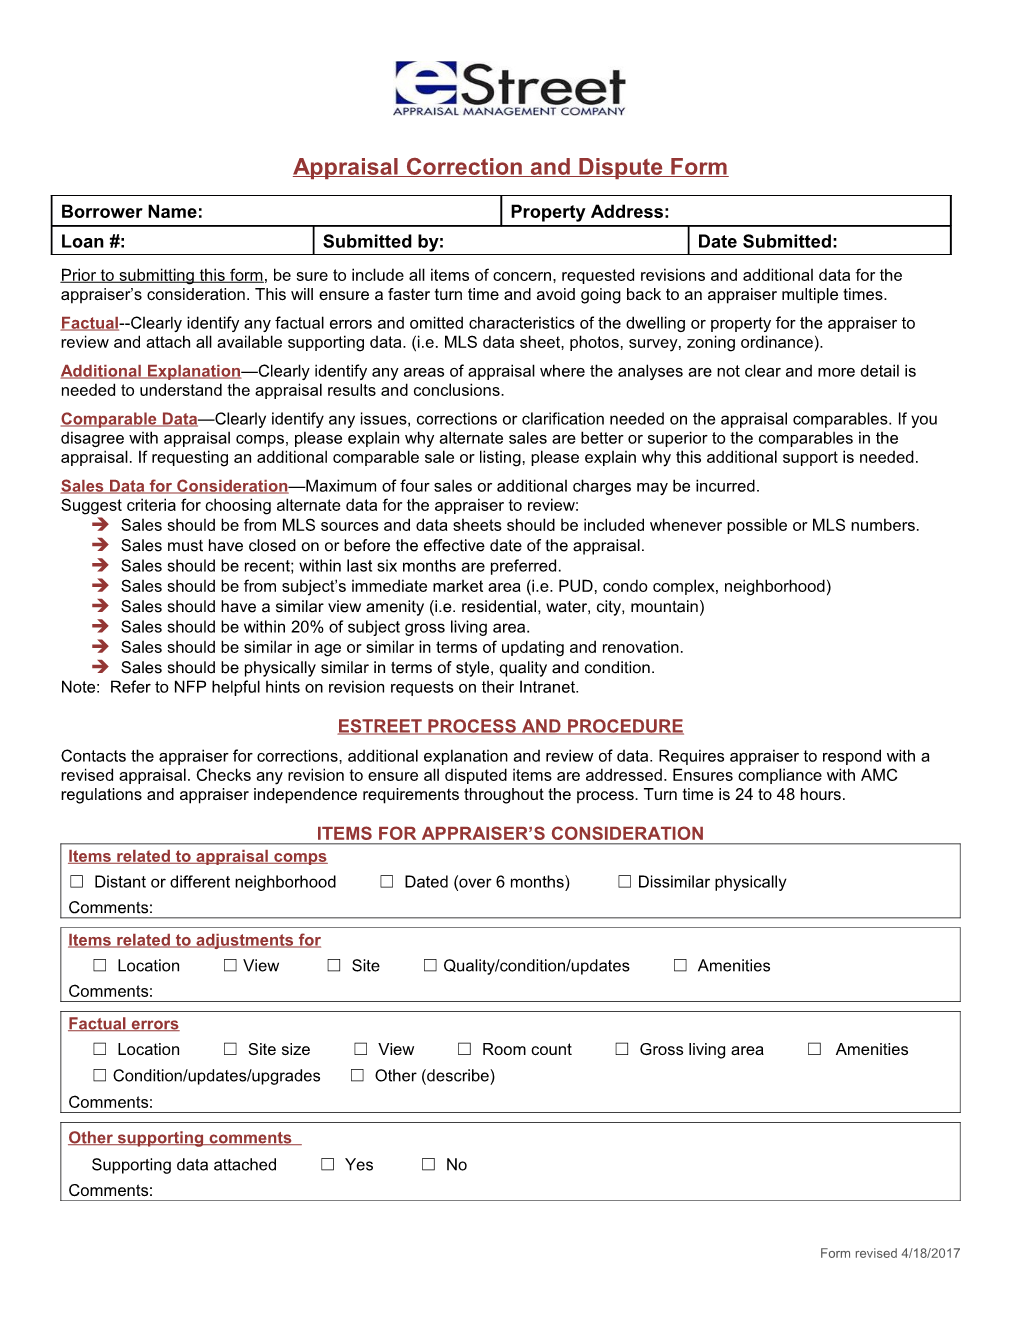 Appraisal Correction and Dispute Form